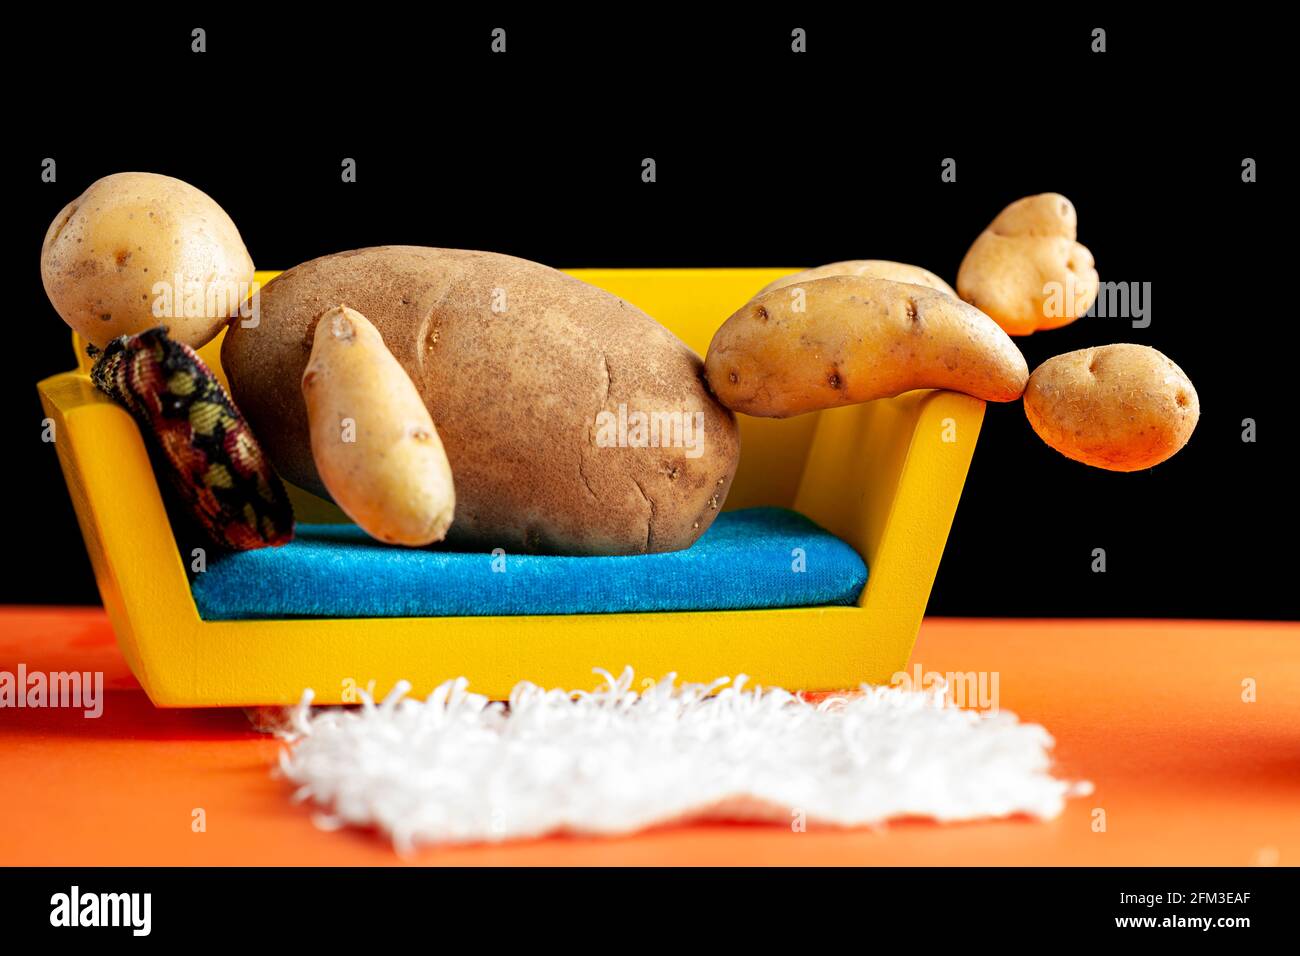 A quirky metaphorical concept image showing a potato man lying on a couch in a living room setting. Image for being couch potato, obesity, sedentary l Stock Photo